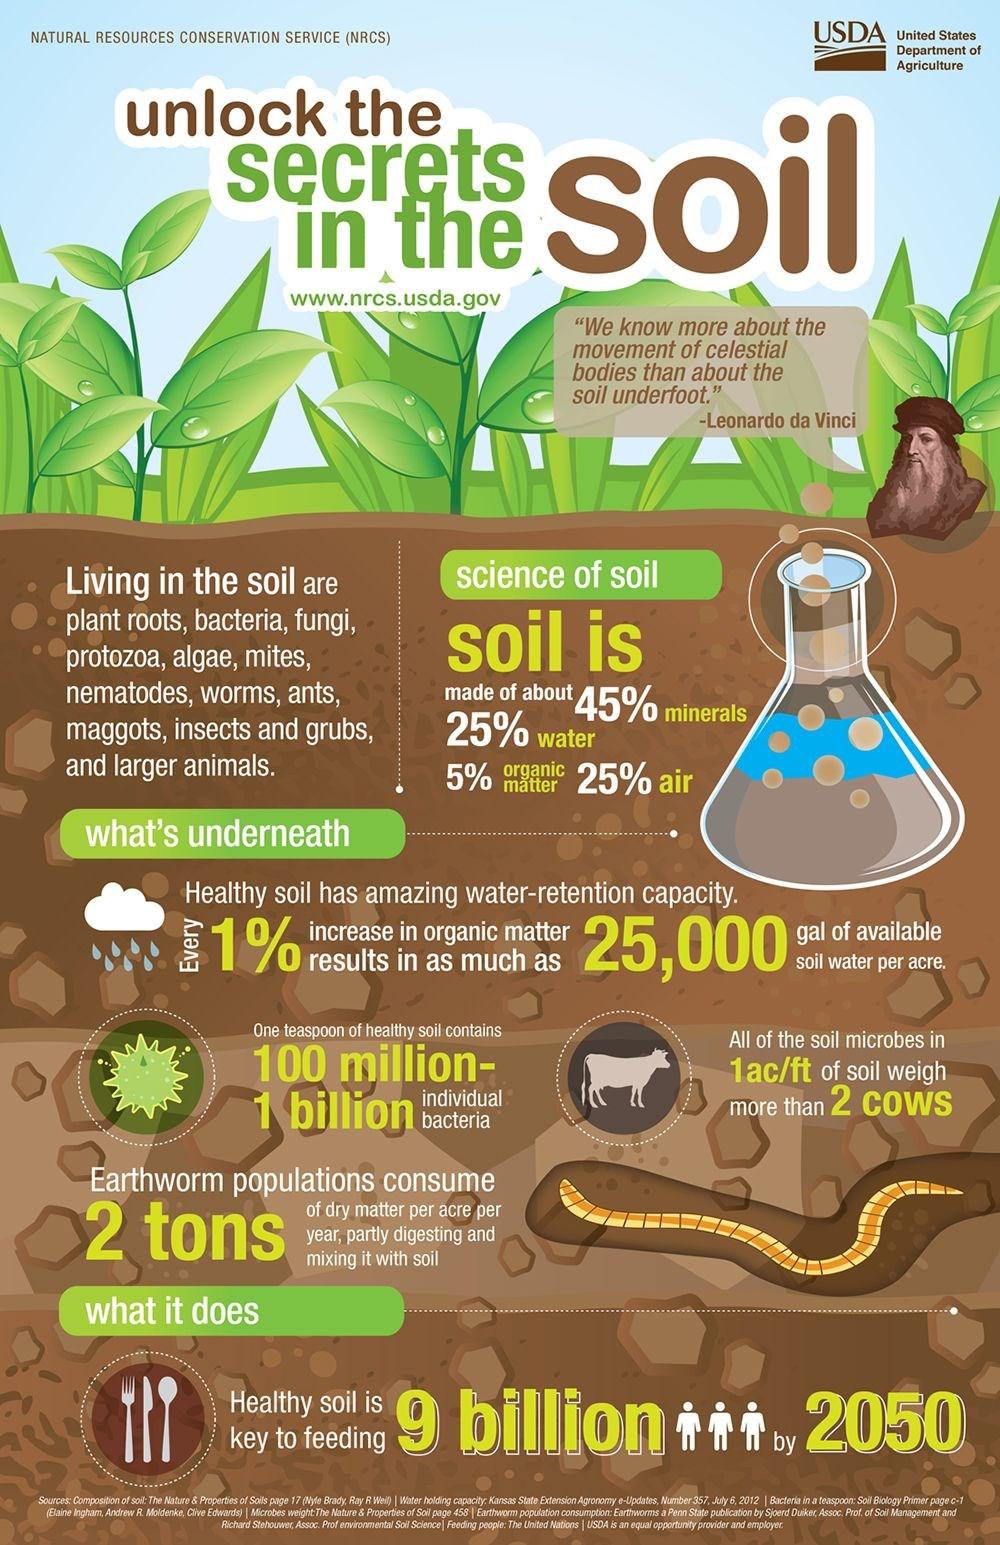 Background Soil is a key element that plants, animals and humans depend on. Unfortunately, there are many environmental challenges associated with soil including erosion and desertification.